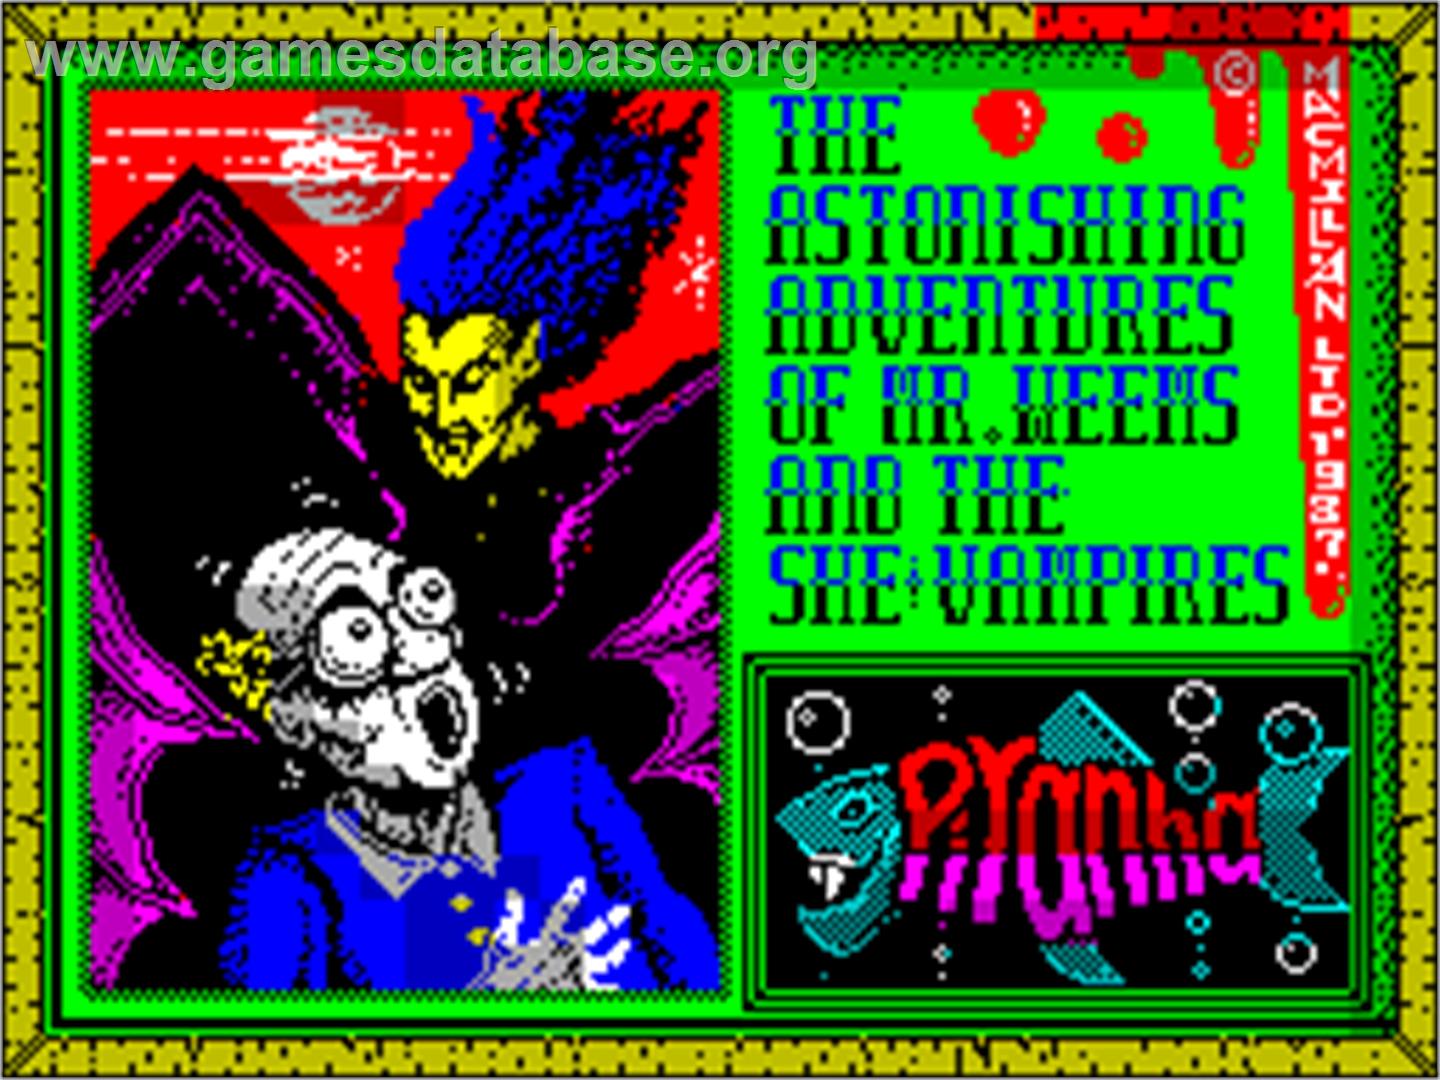 The Astonishing Adventures of Mr. Weems and the She Vampires - Sinclair ZX Spectrum - Artwork - Title Screen